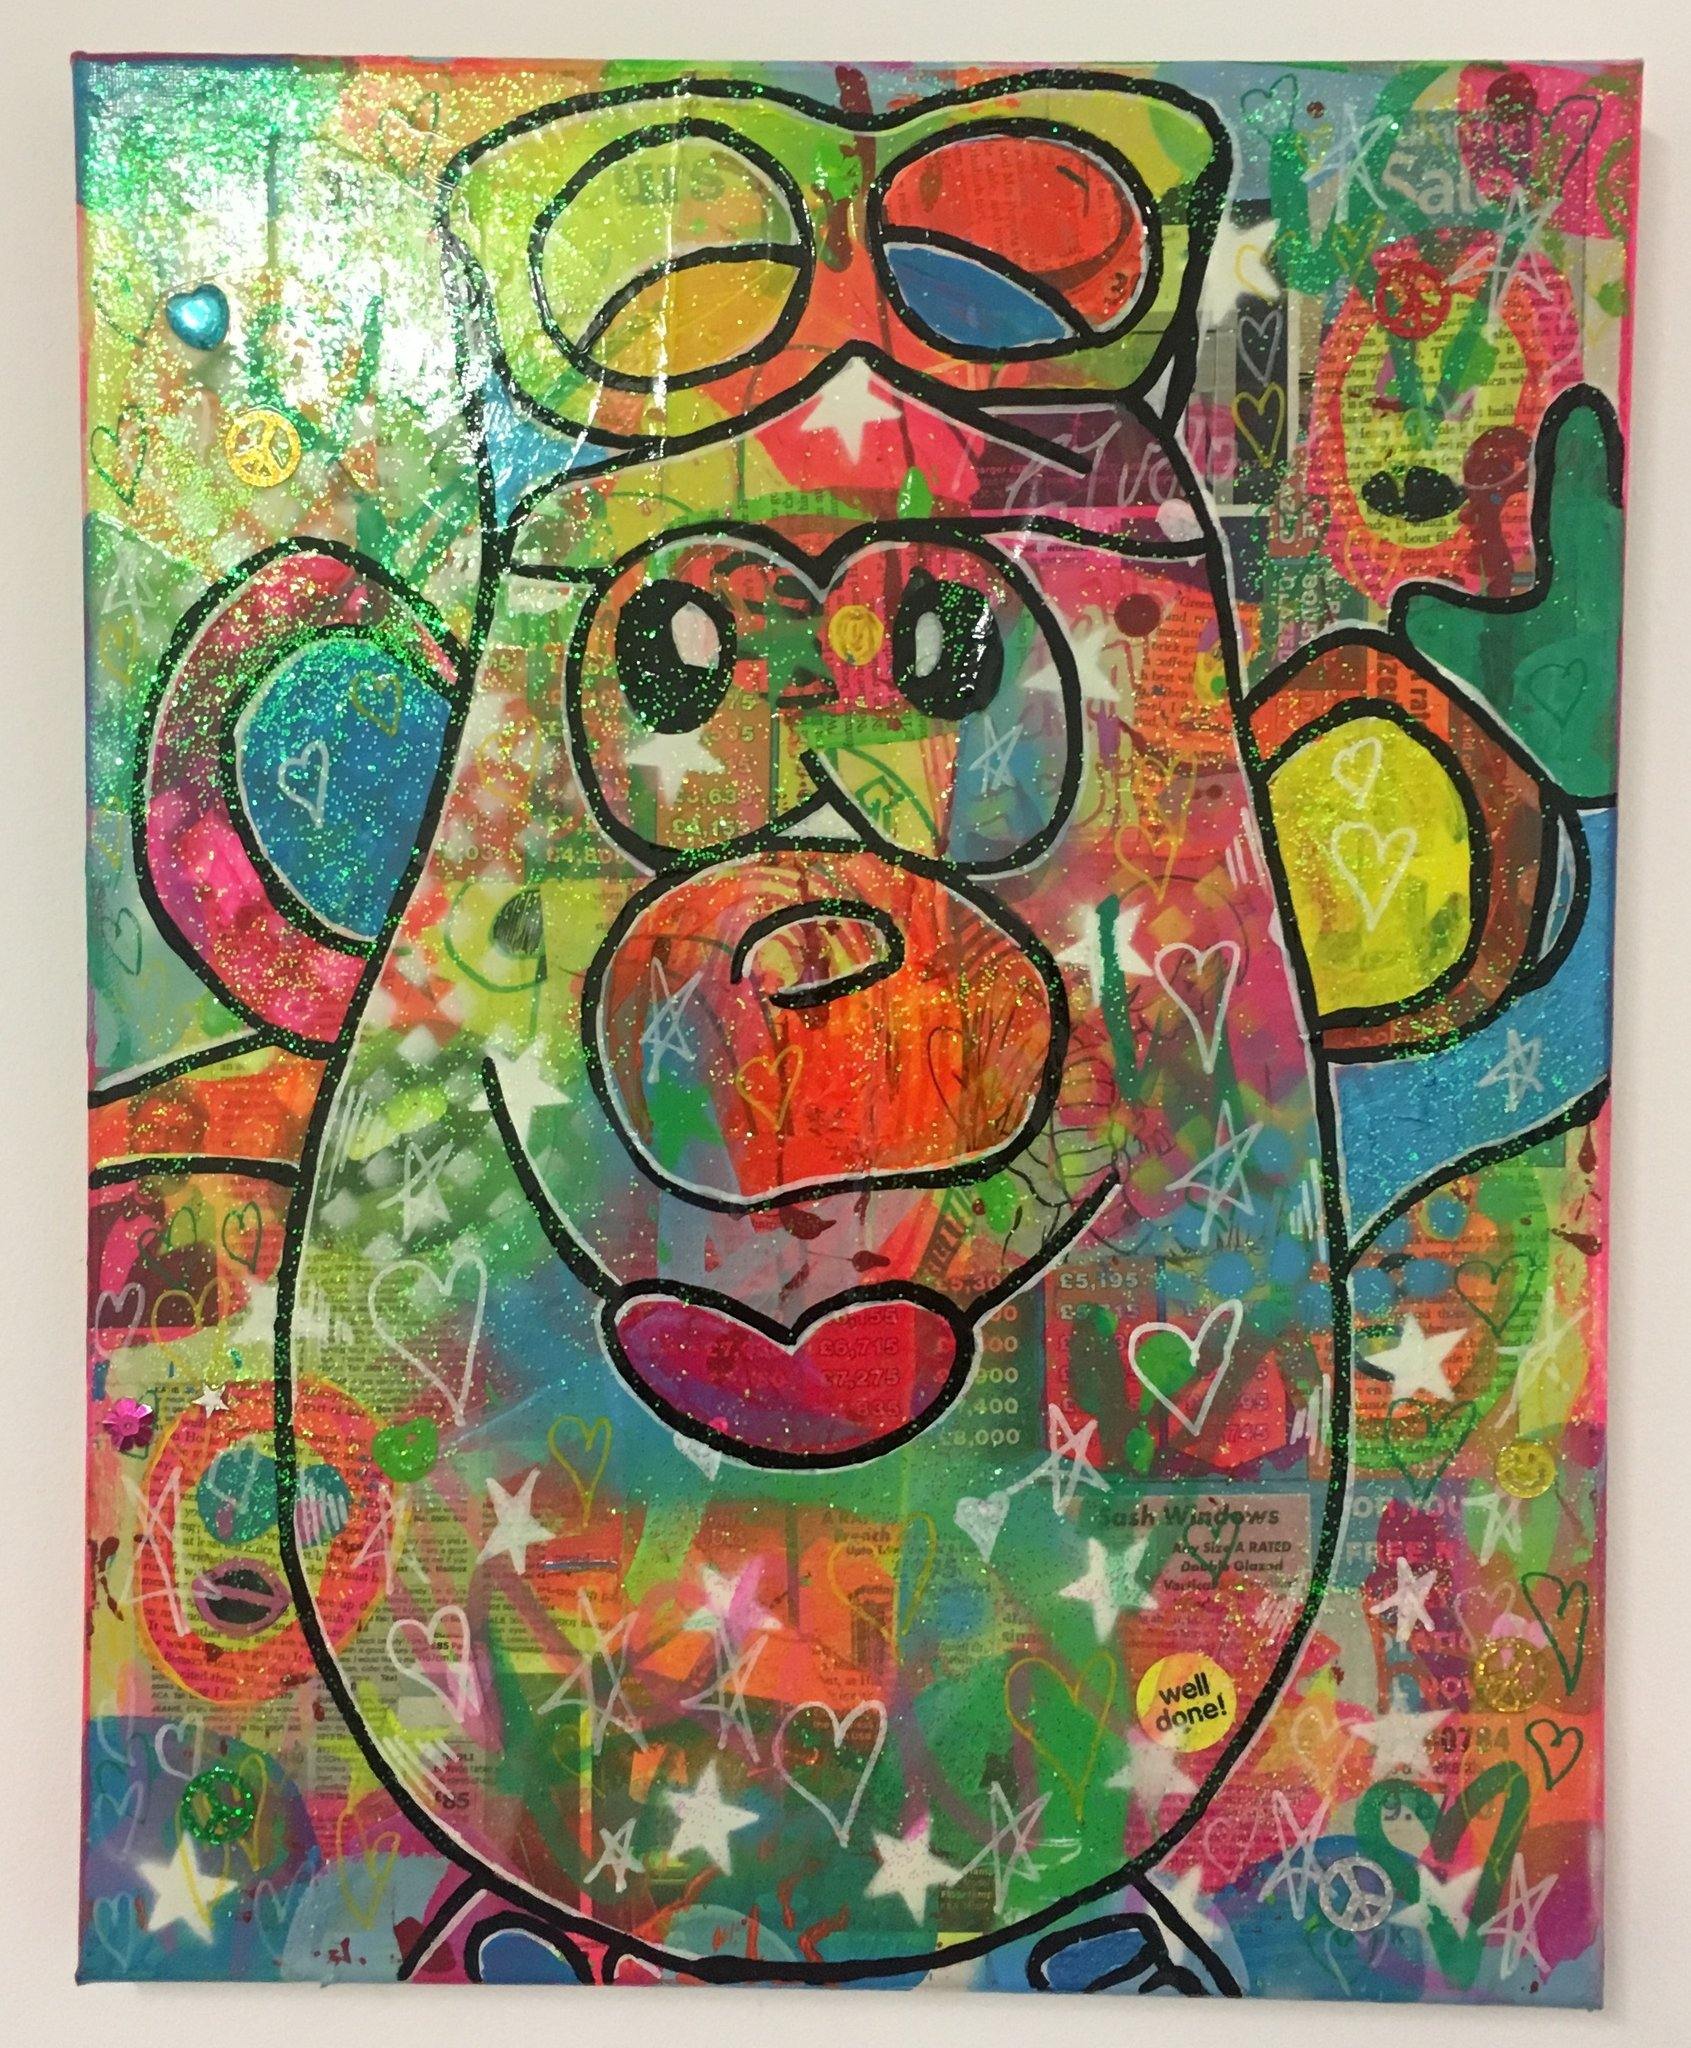 Best foot forward by Barrie J Davies 2017, Mixed media painting on canvas, 40cm x 50cm, unframed. Barrie J Davies is an Artist - Pop Art and Street art inspired Artist based in Brighton England UK - Pop Art Paintings, Street Art Prints & Editions available.